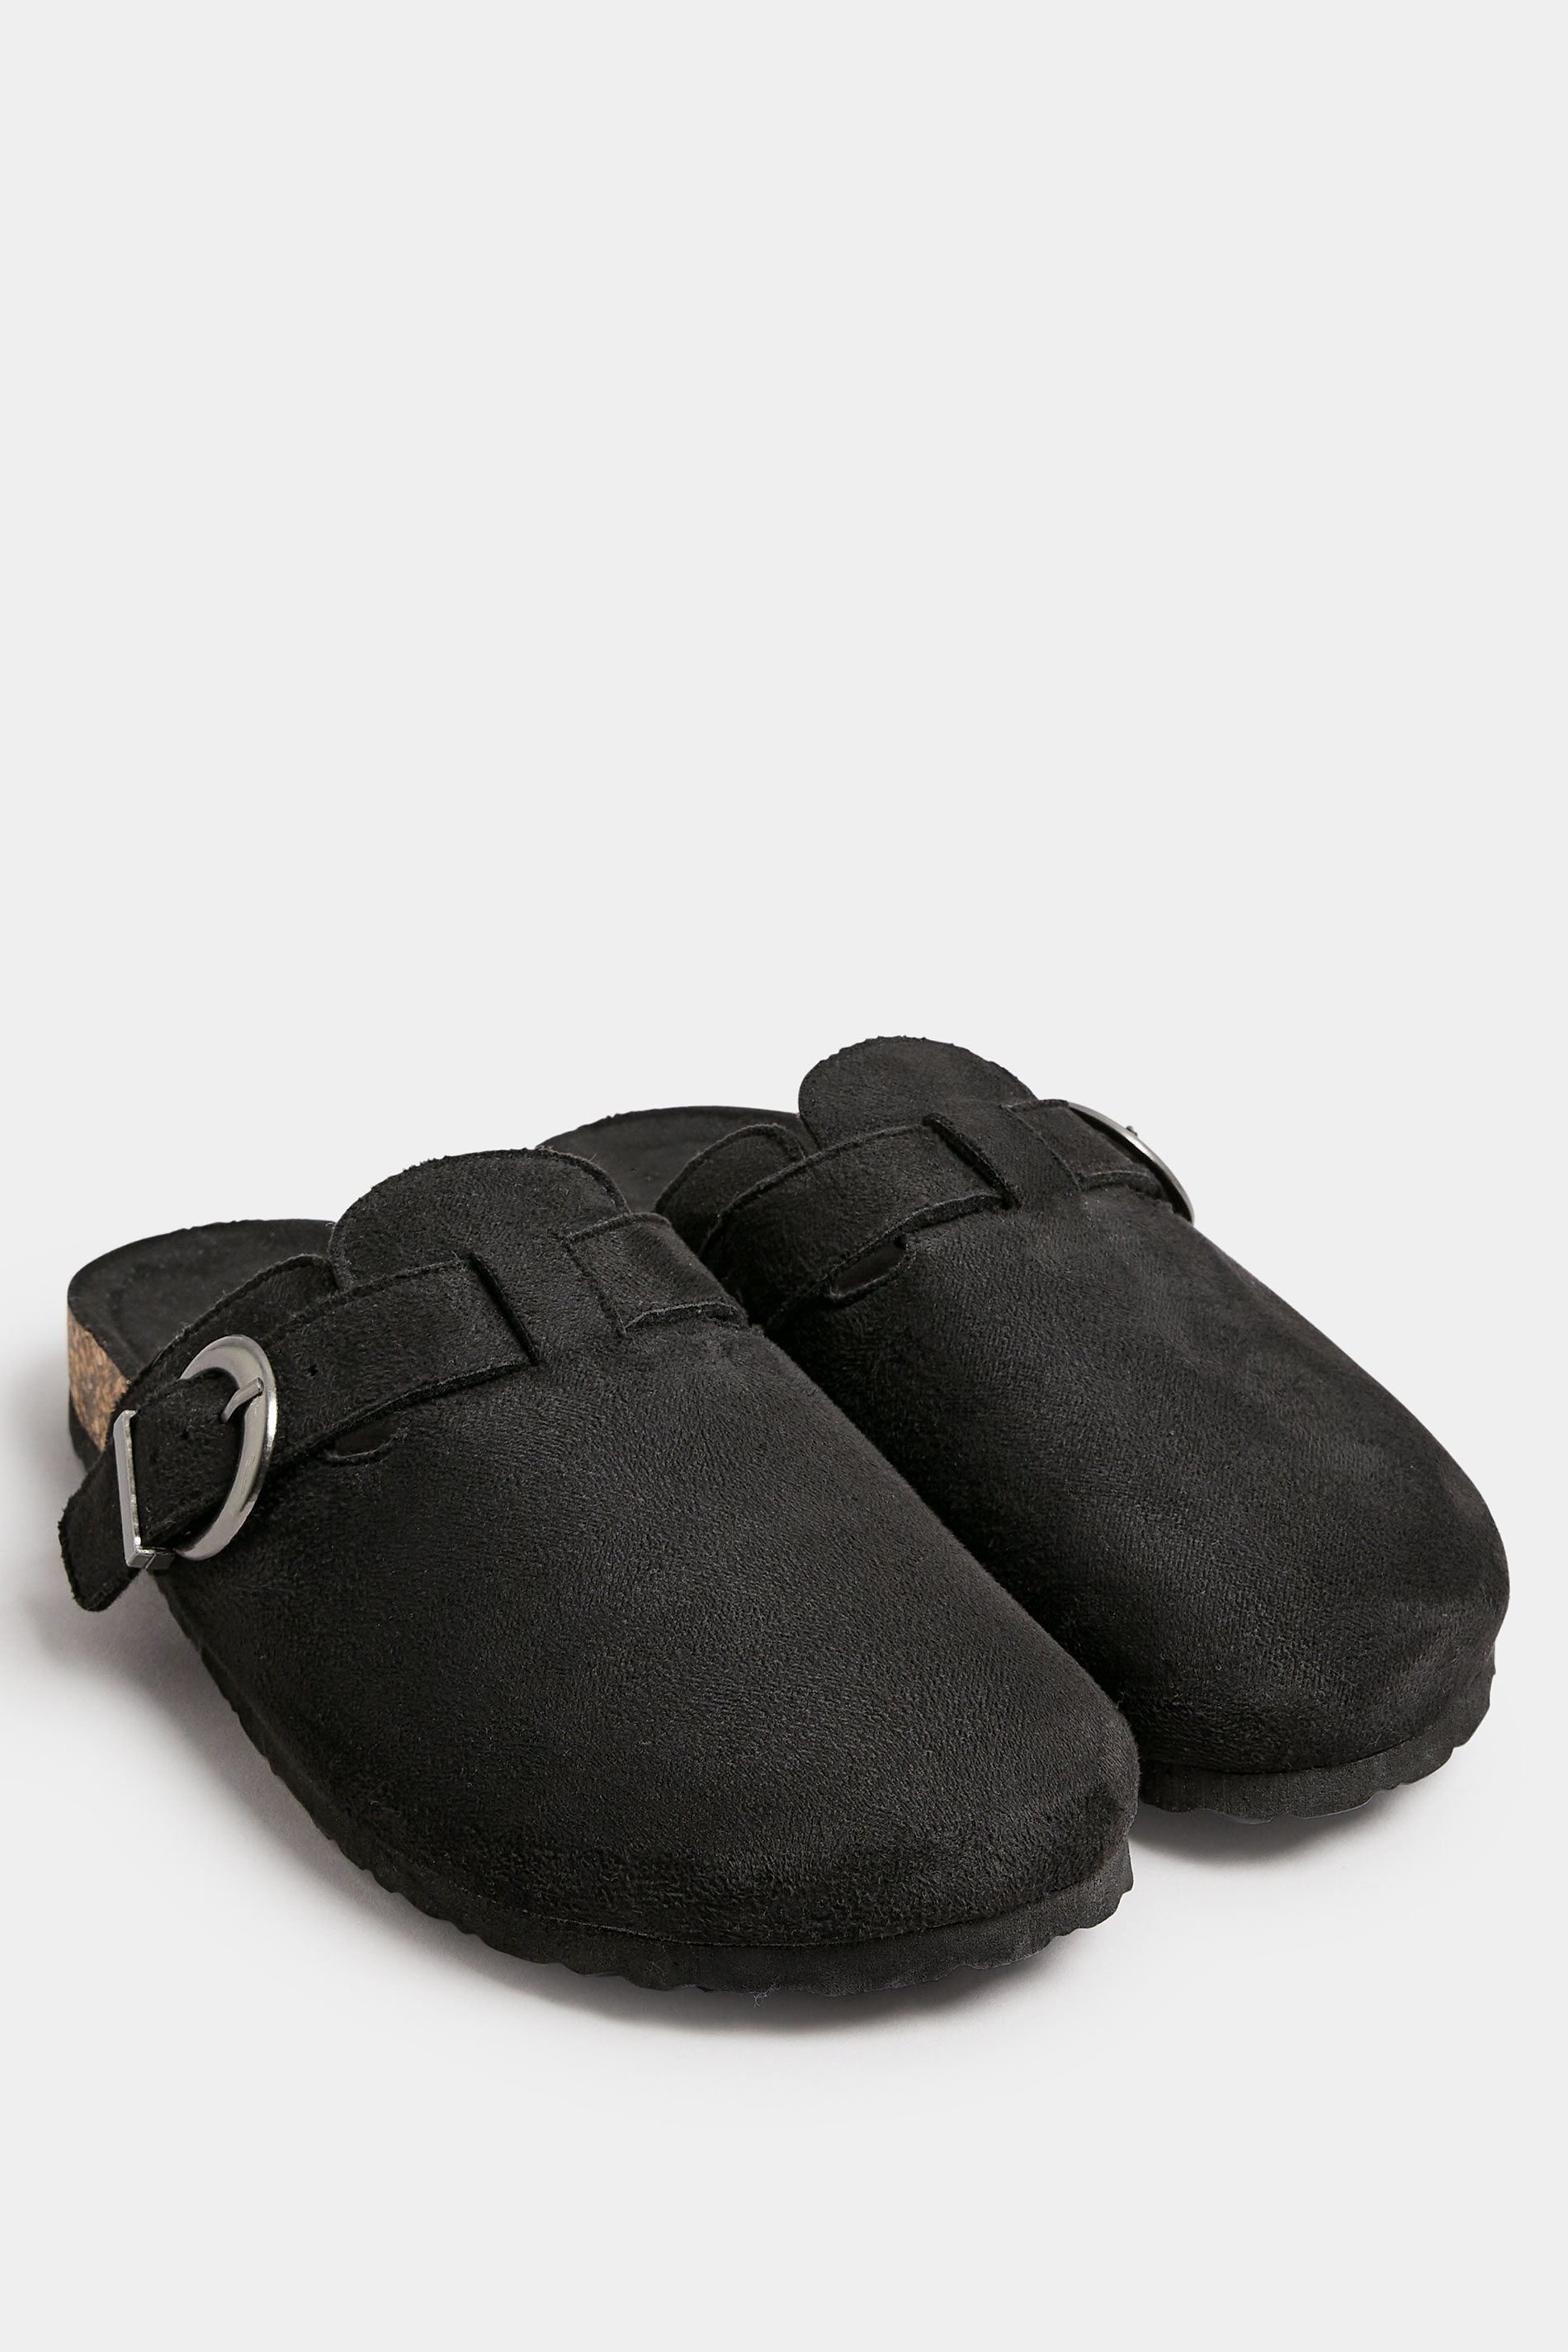 Black Faux Suede Clogs In Extra Wide EEE Fit | Yours Clothing 2